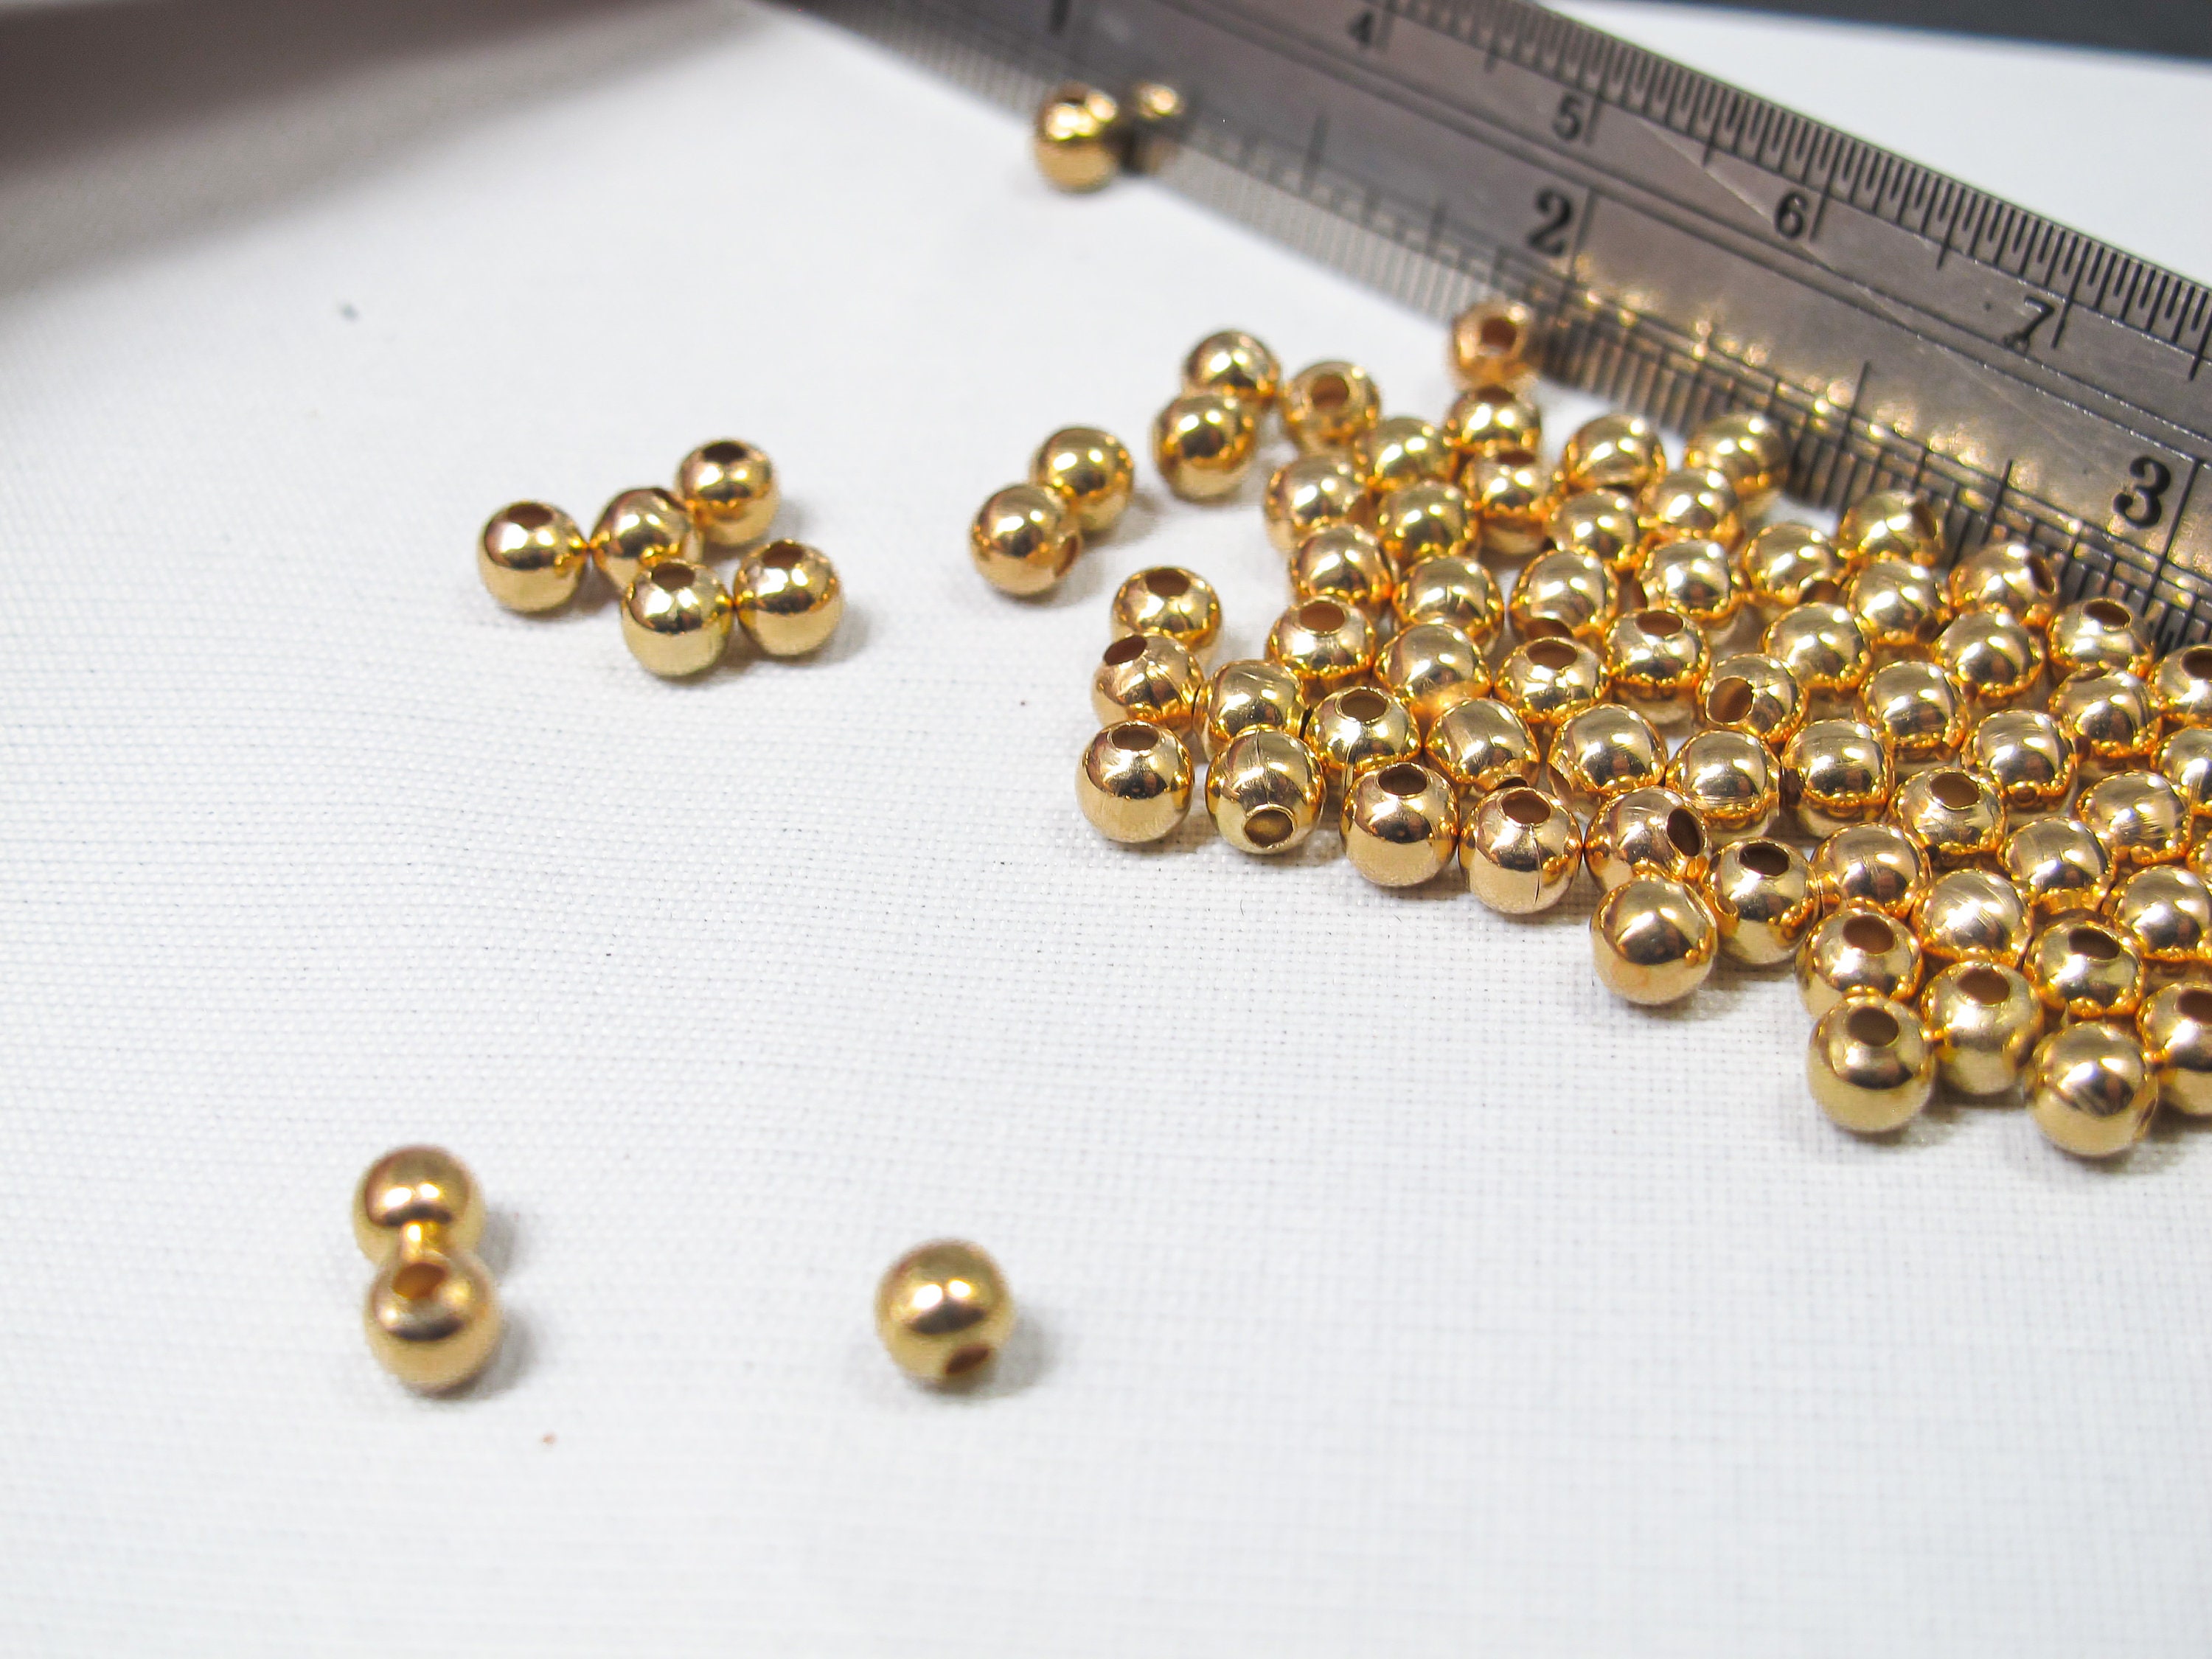 Gold Plated Round Spacer Nebulizer Beads 3mm Ideal For DIY Jewelry